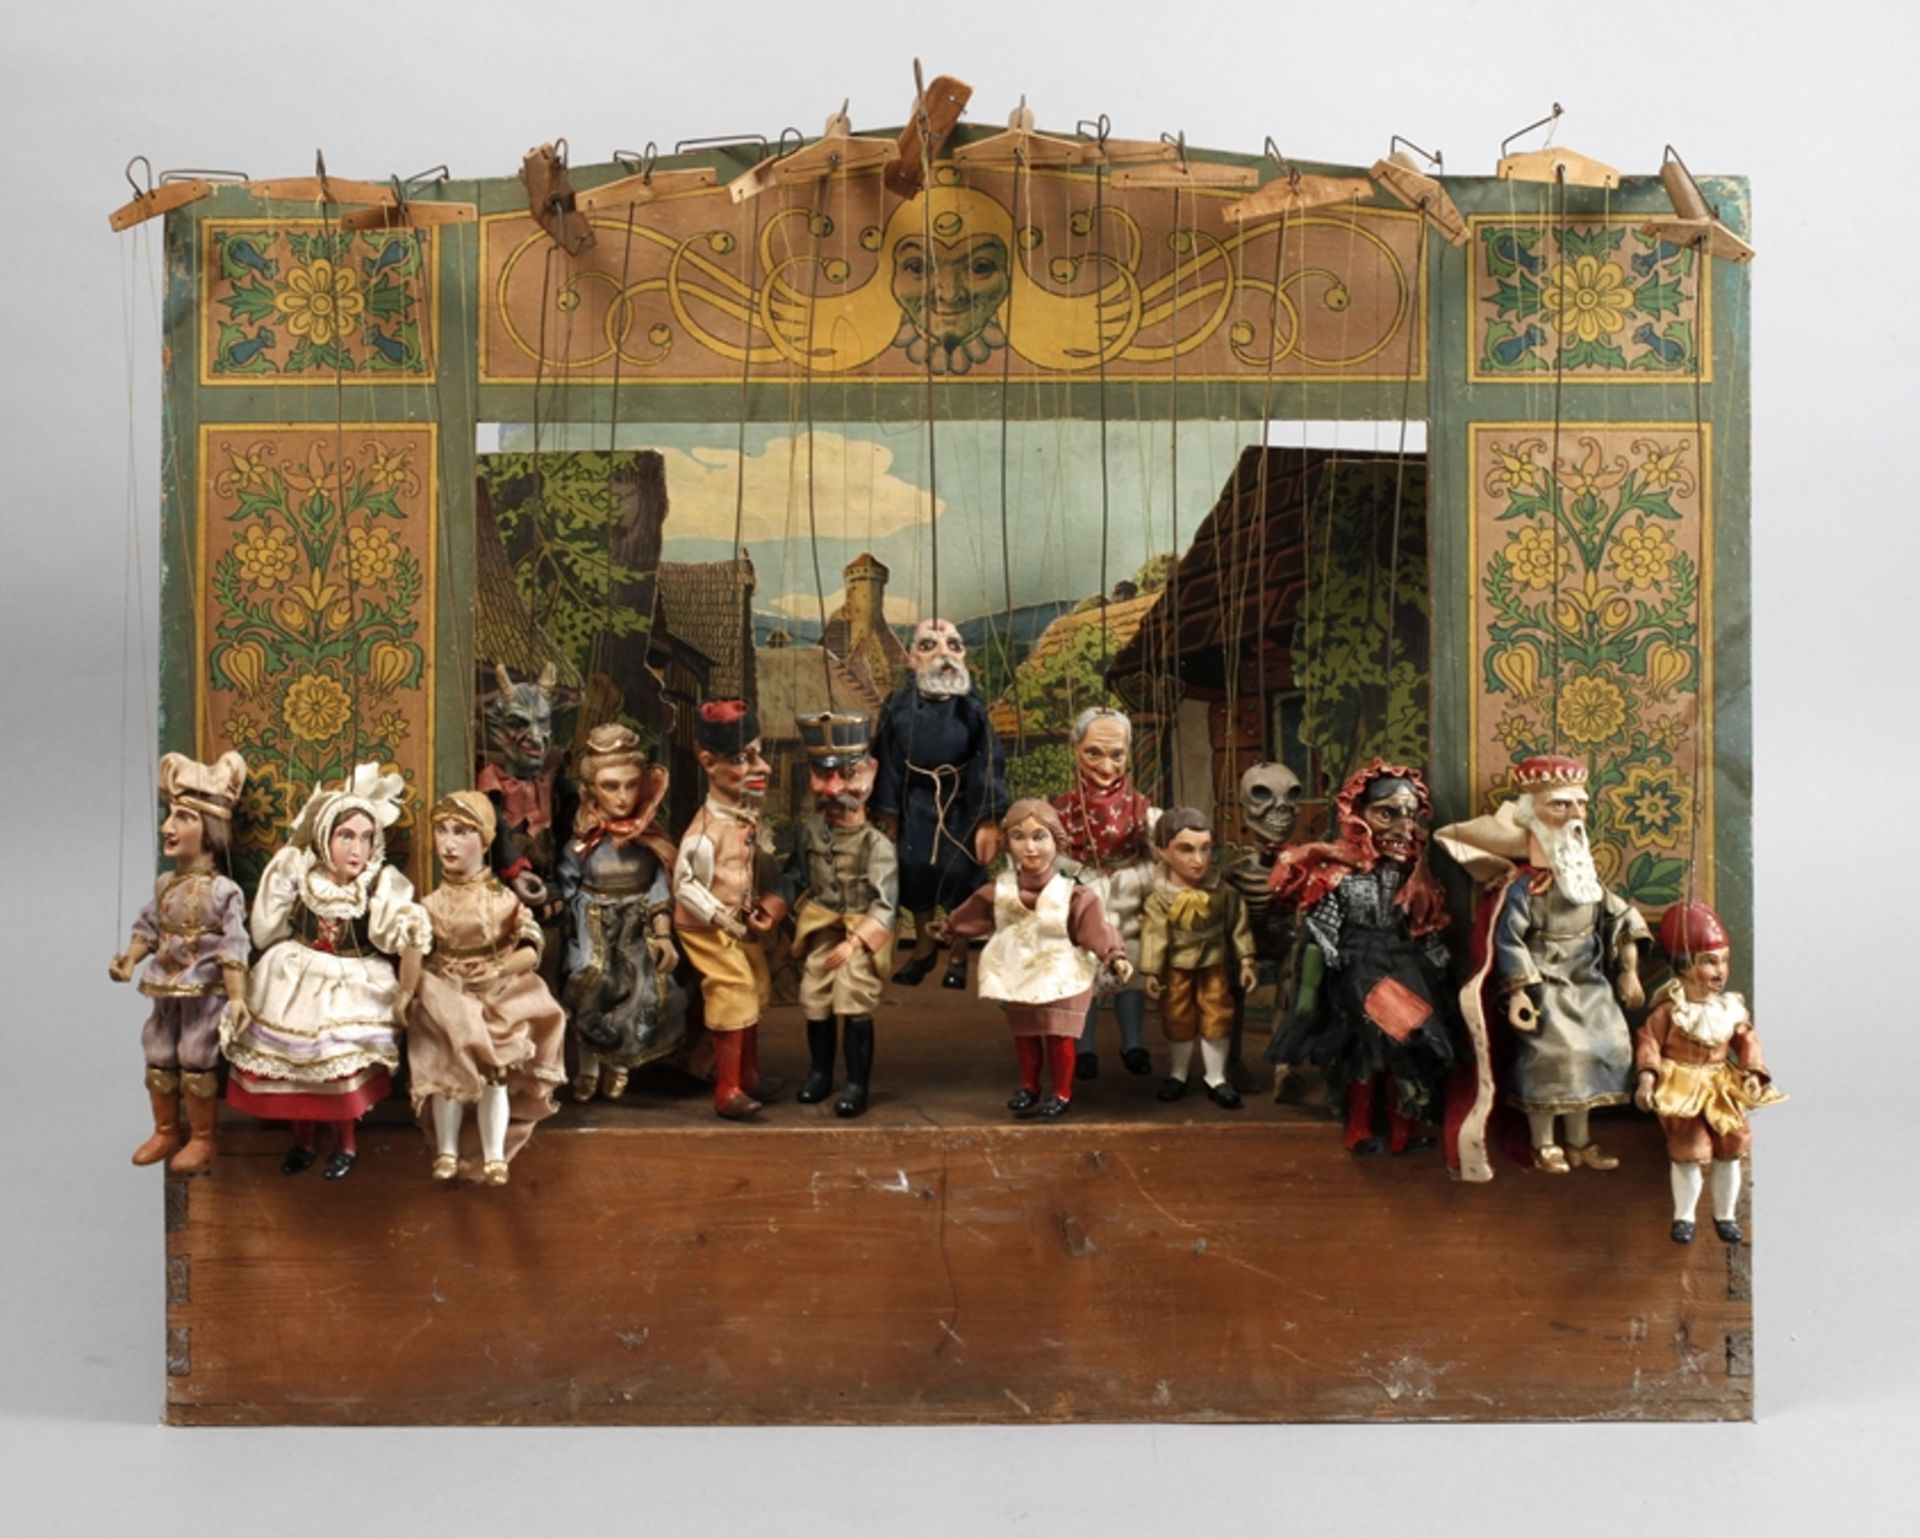 Puppet theatre with puppets